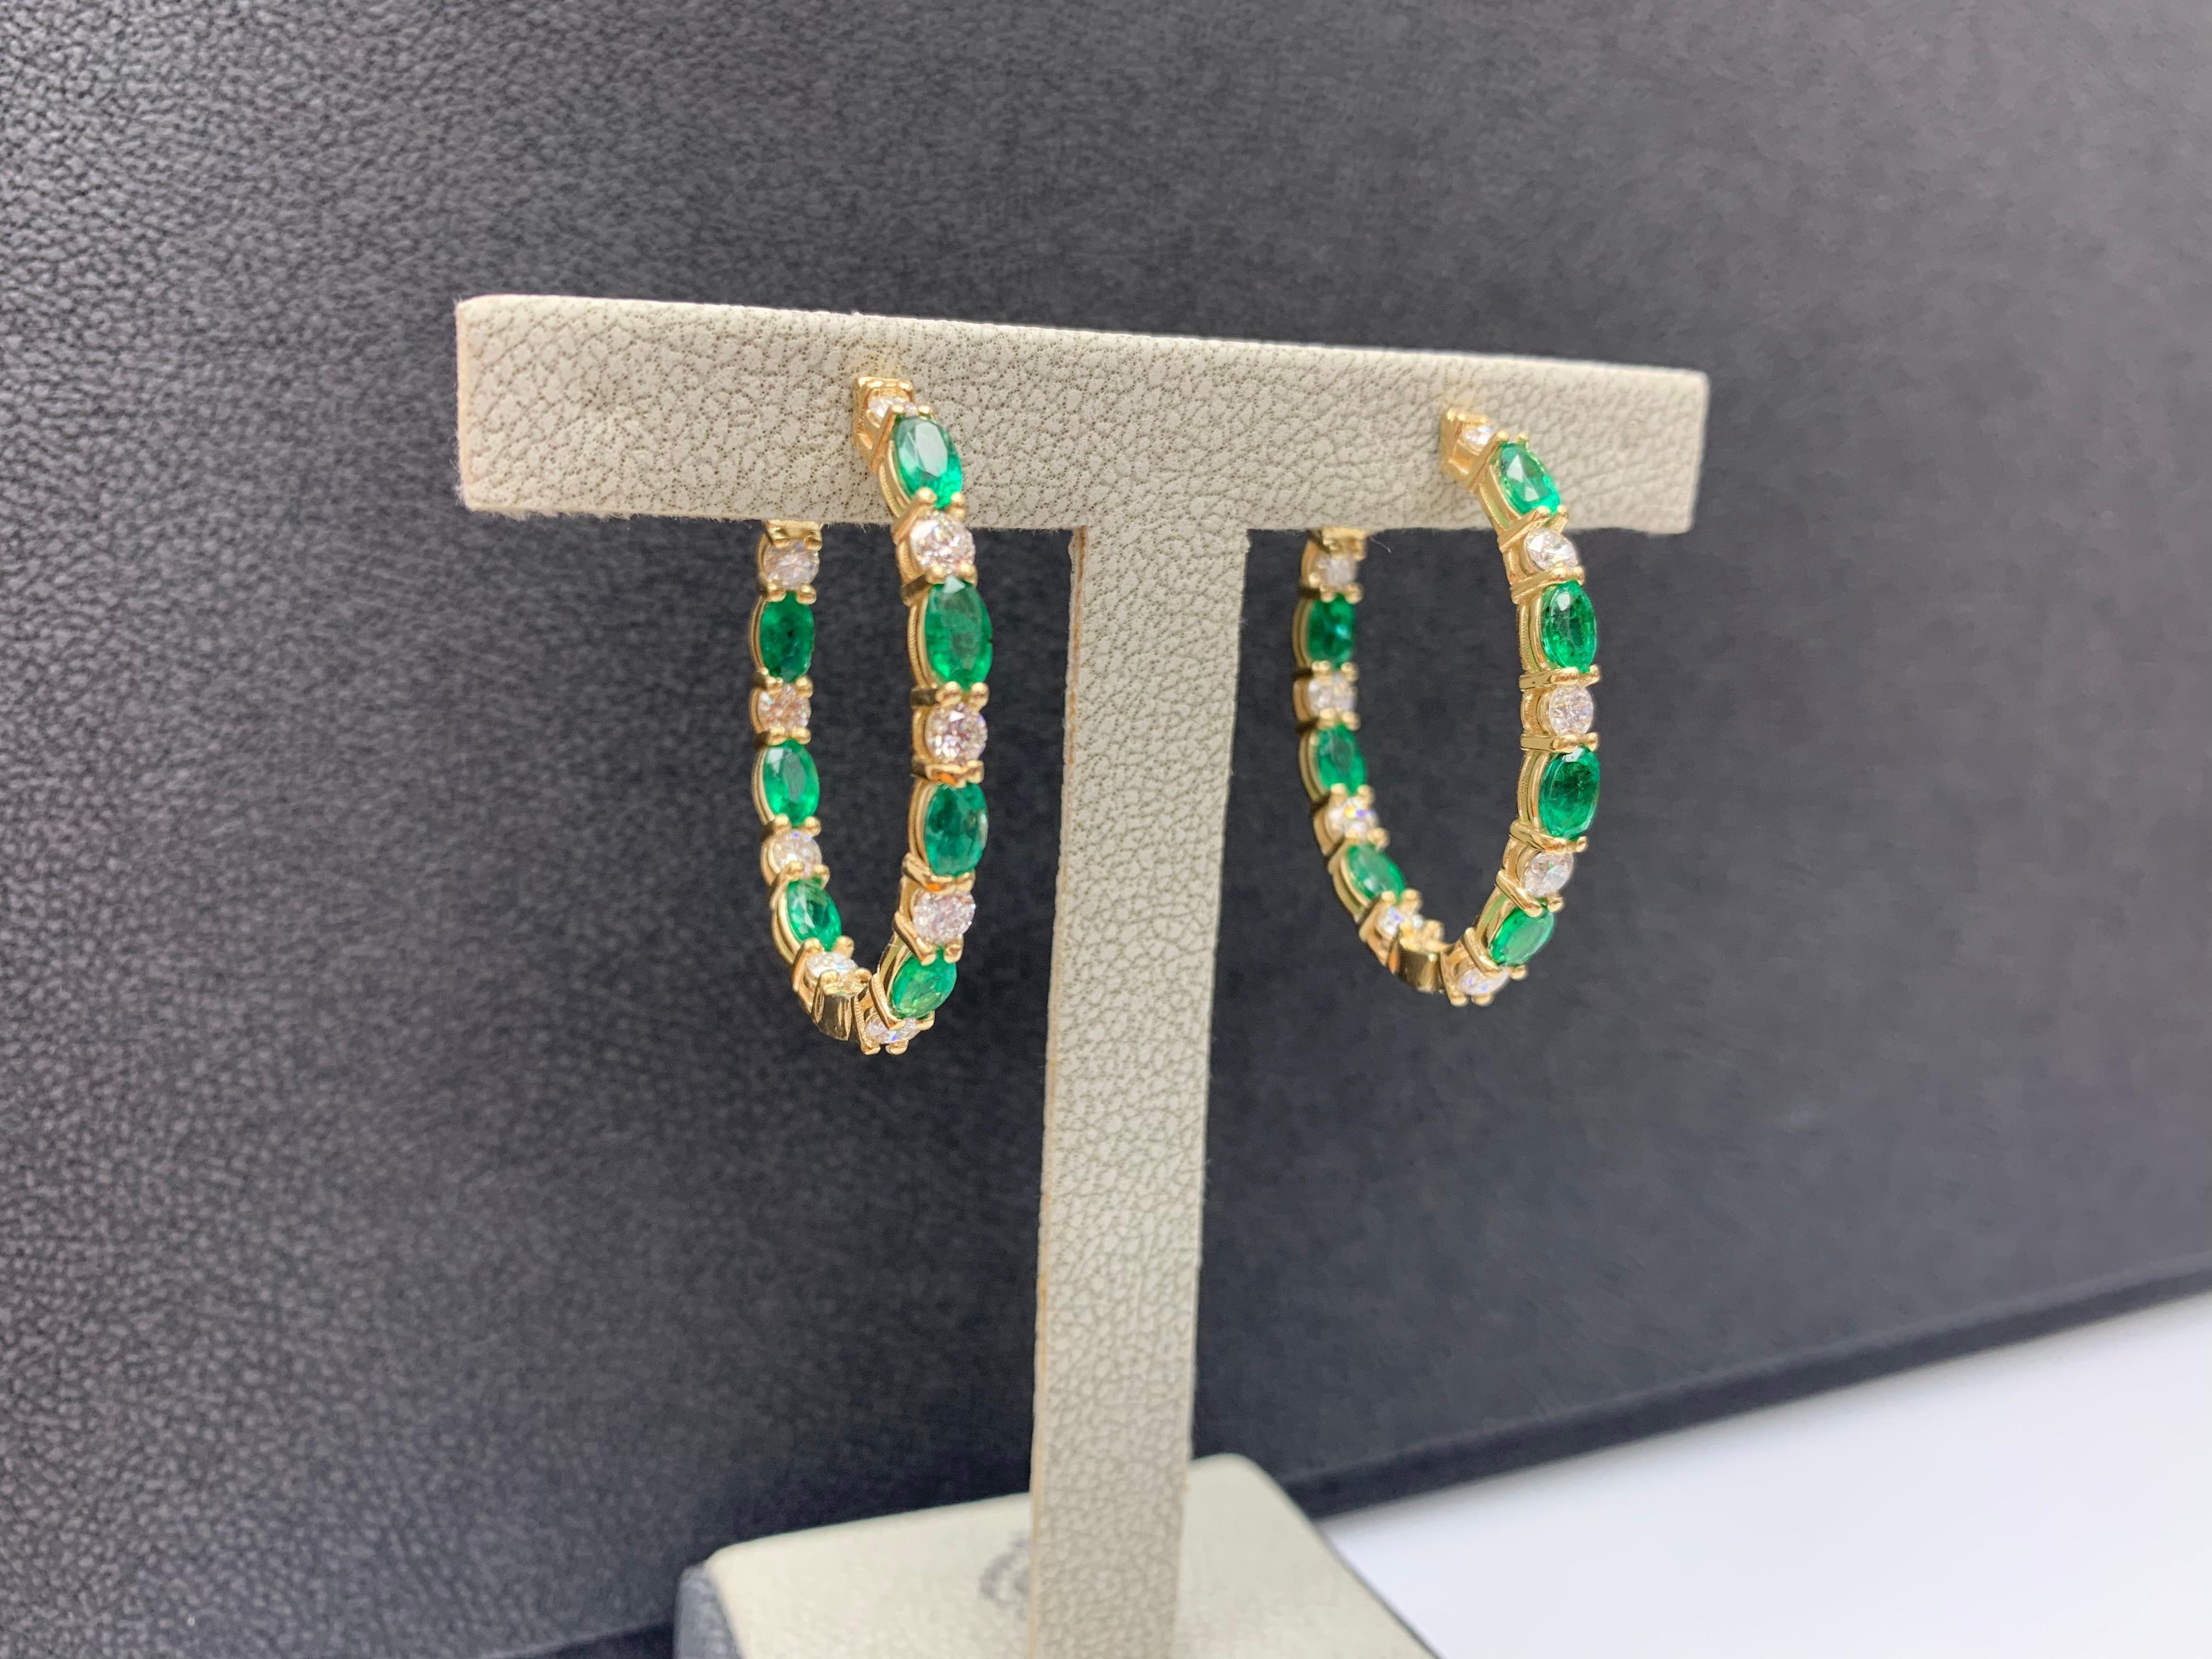 3.13 Carat Oval Cut Emerald and Diamond Hoop Earrings in 14K Yellow Gold For Sale 4